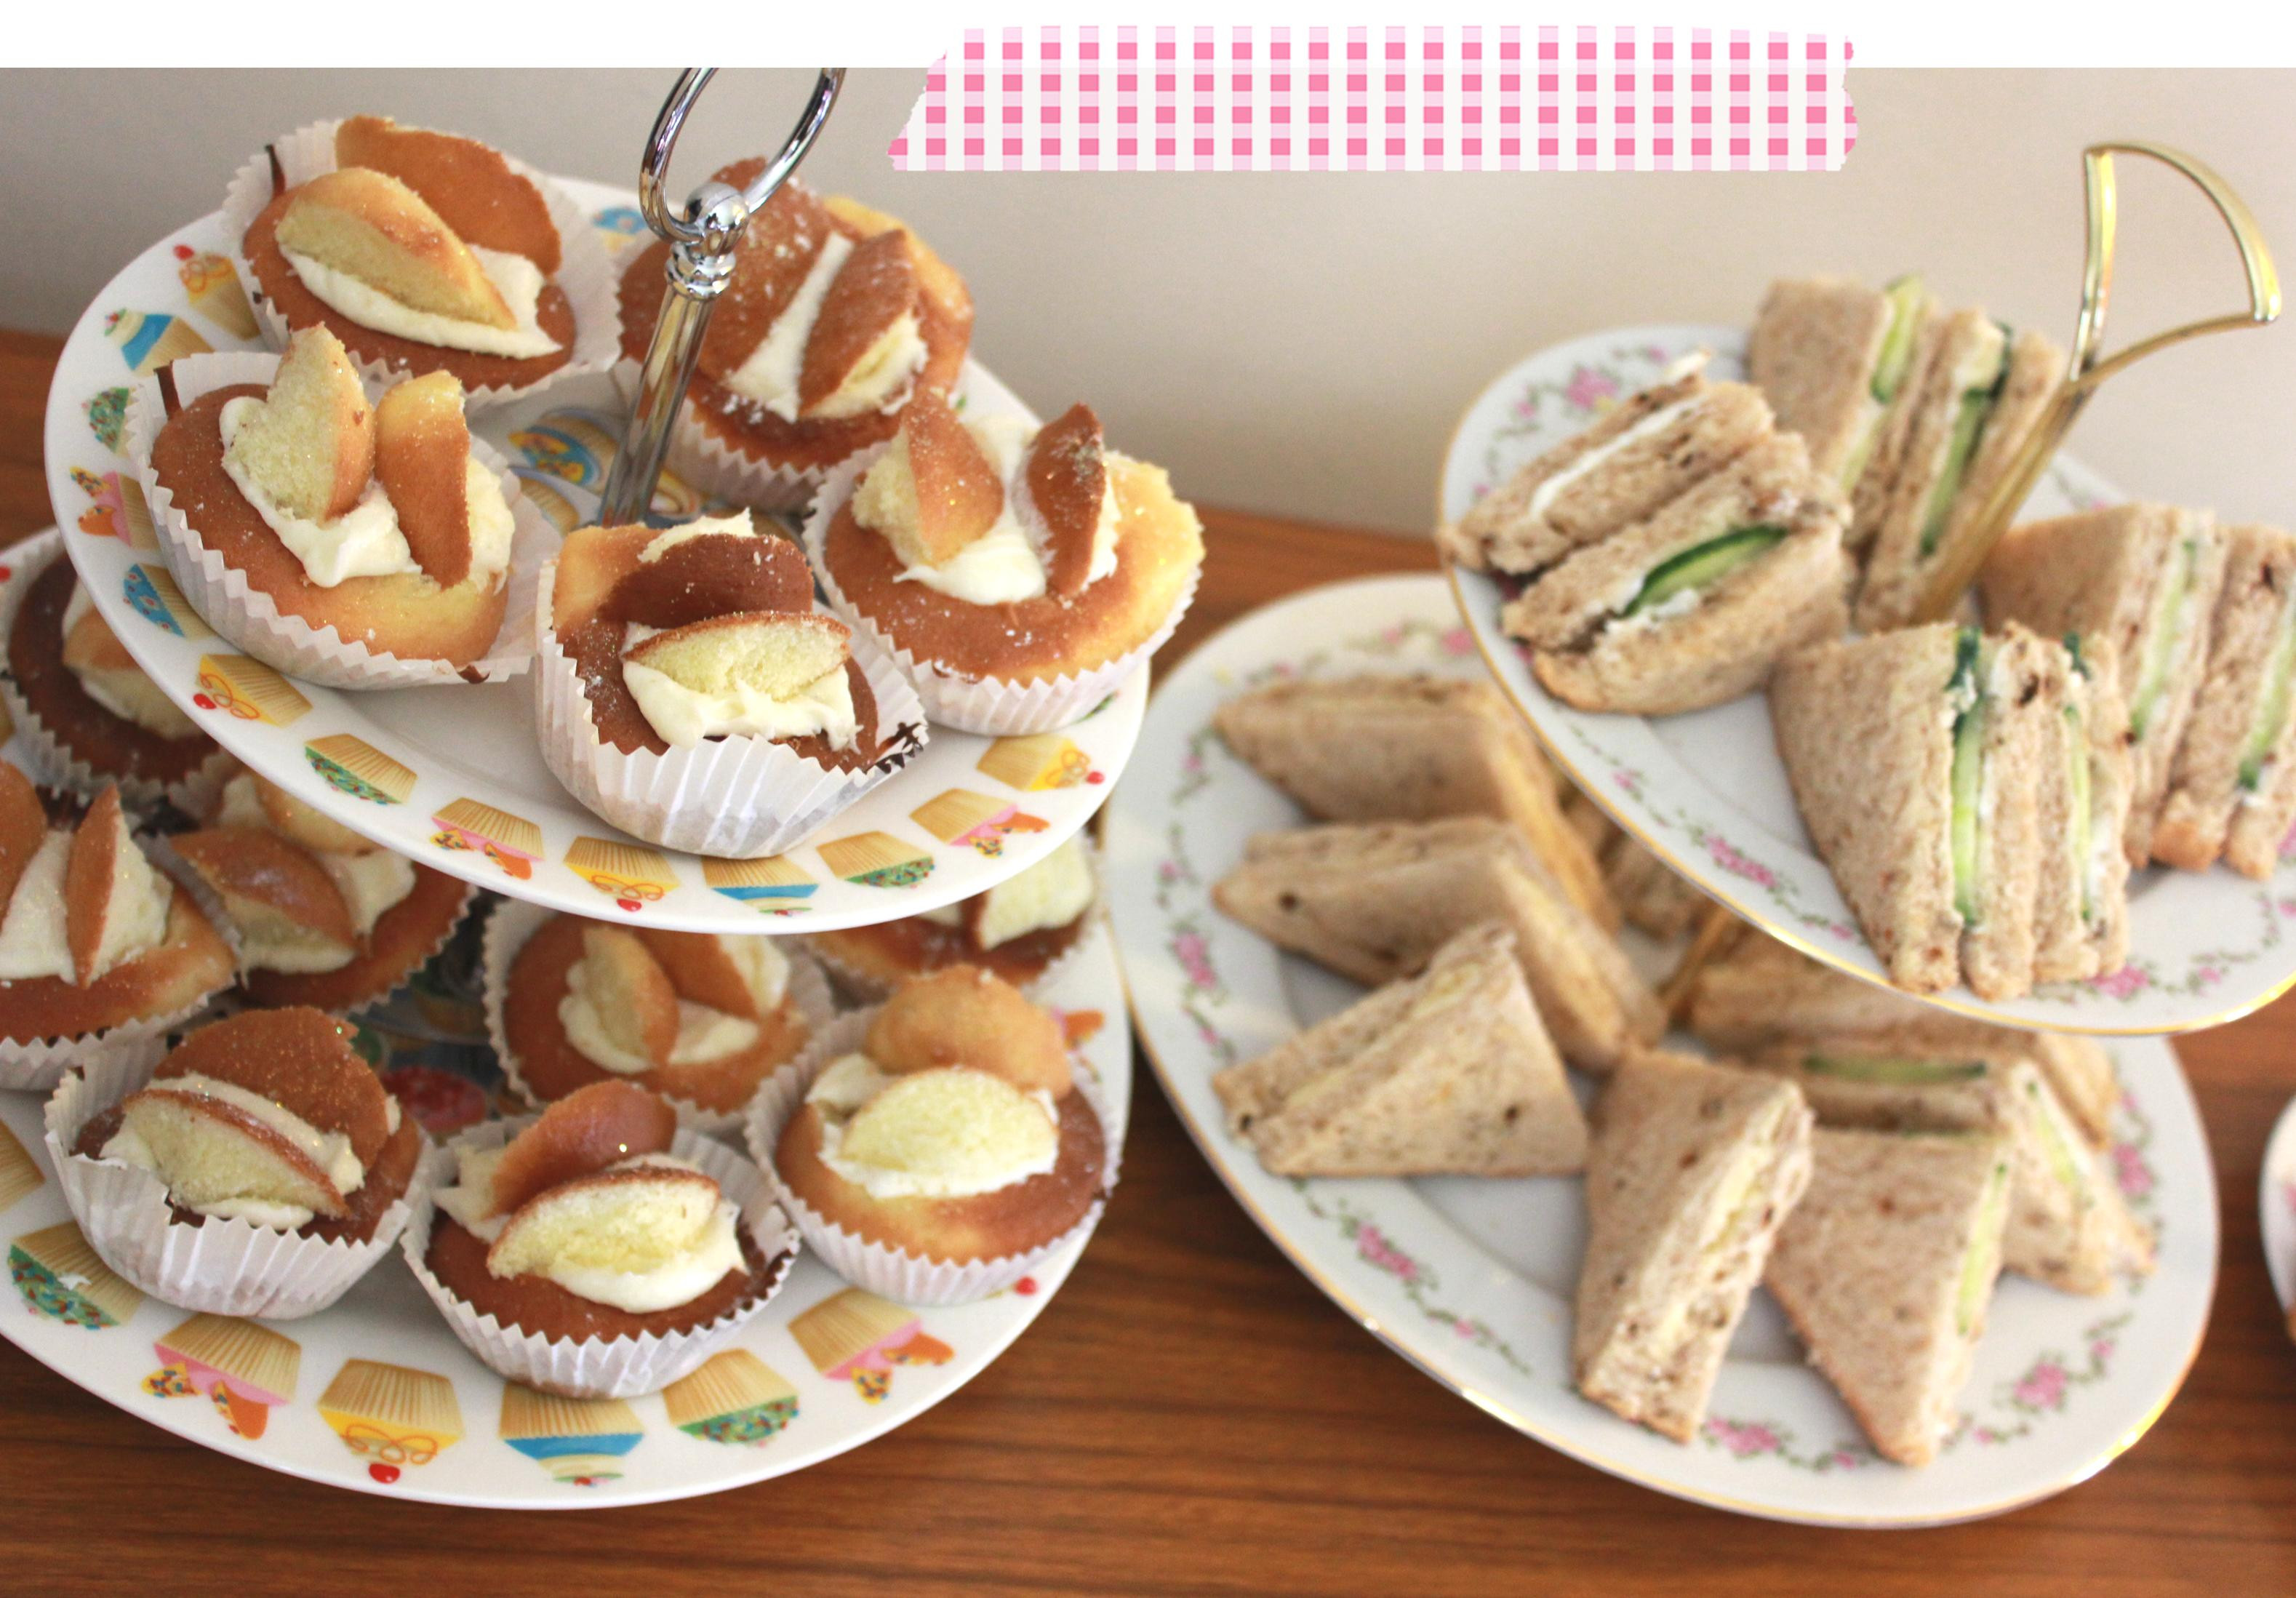 Tea Party Menu Ideas For Adults
 Anyone for afternoon tea Ideas for a thrifty party